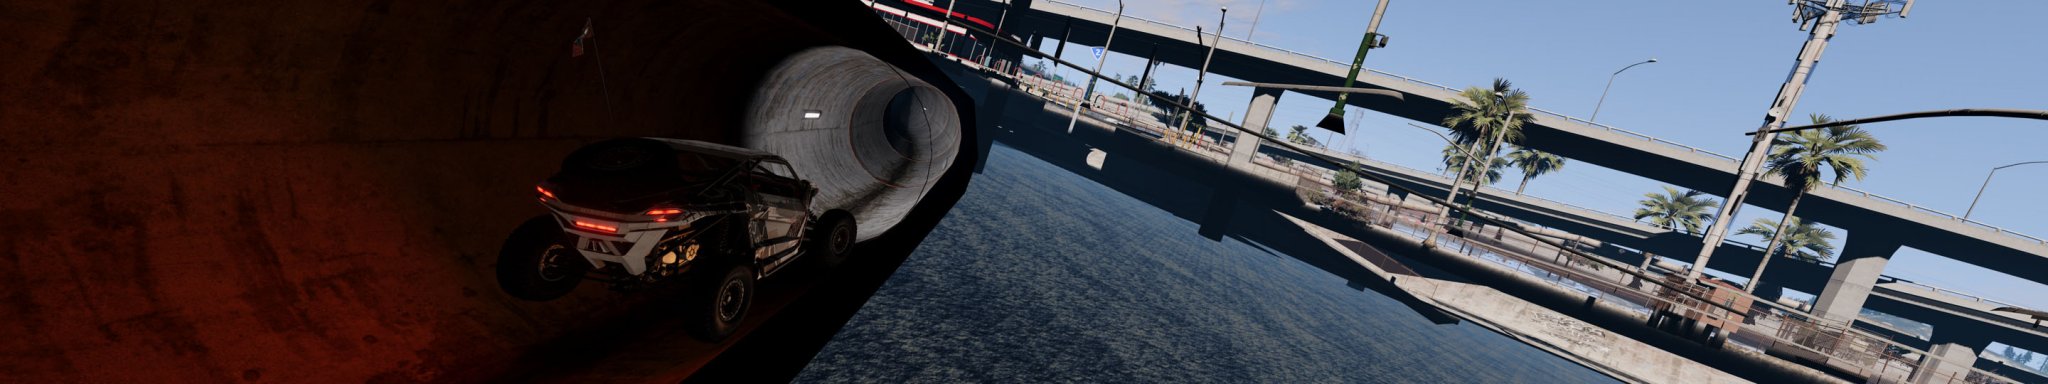 0a BeamNG Hirochi AURATO RACE in LARGE PIPE copy.jpg